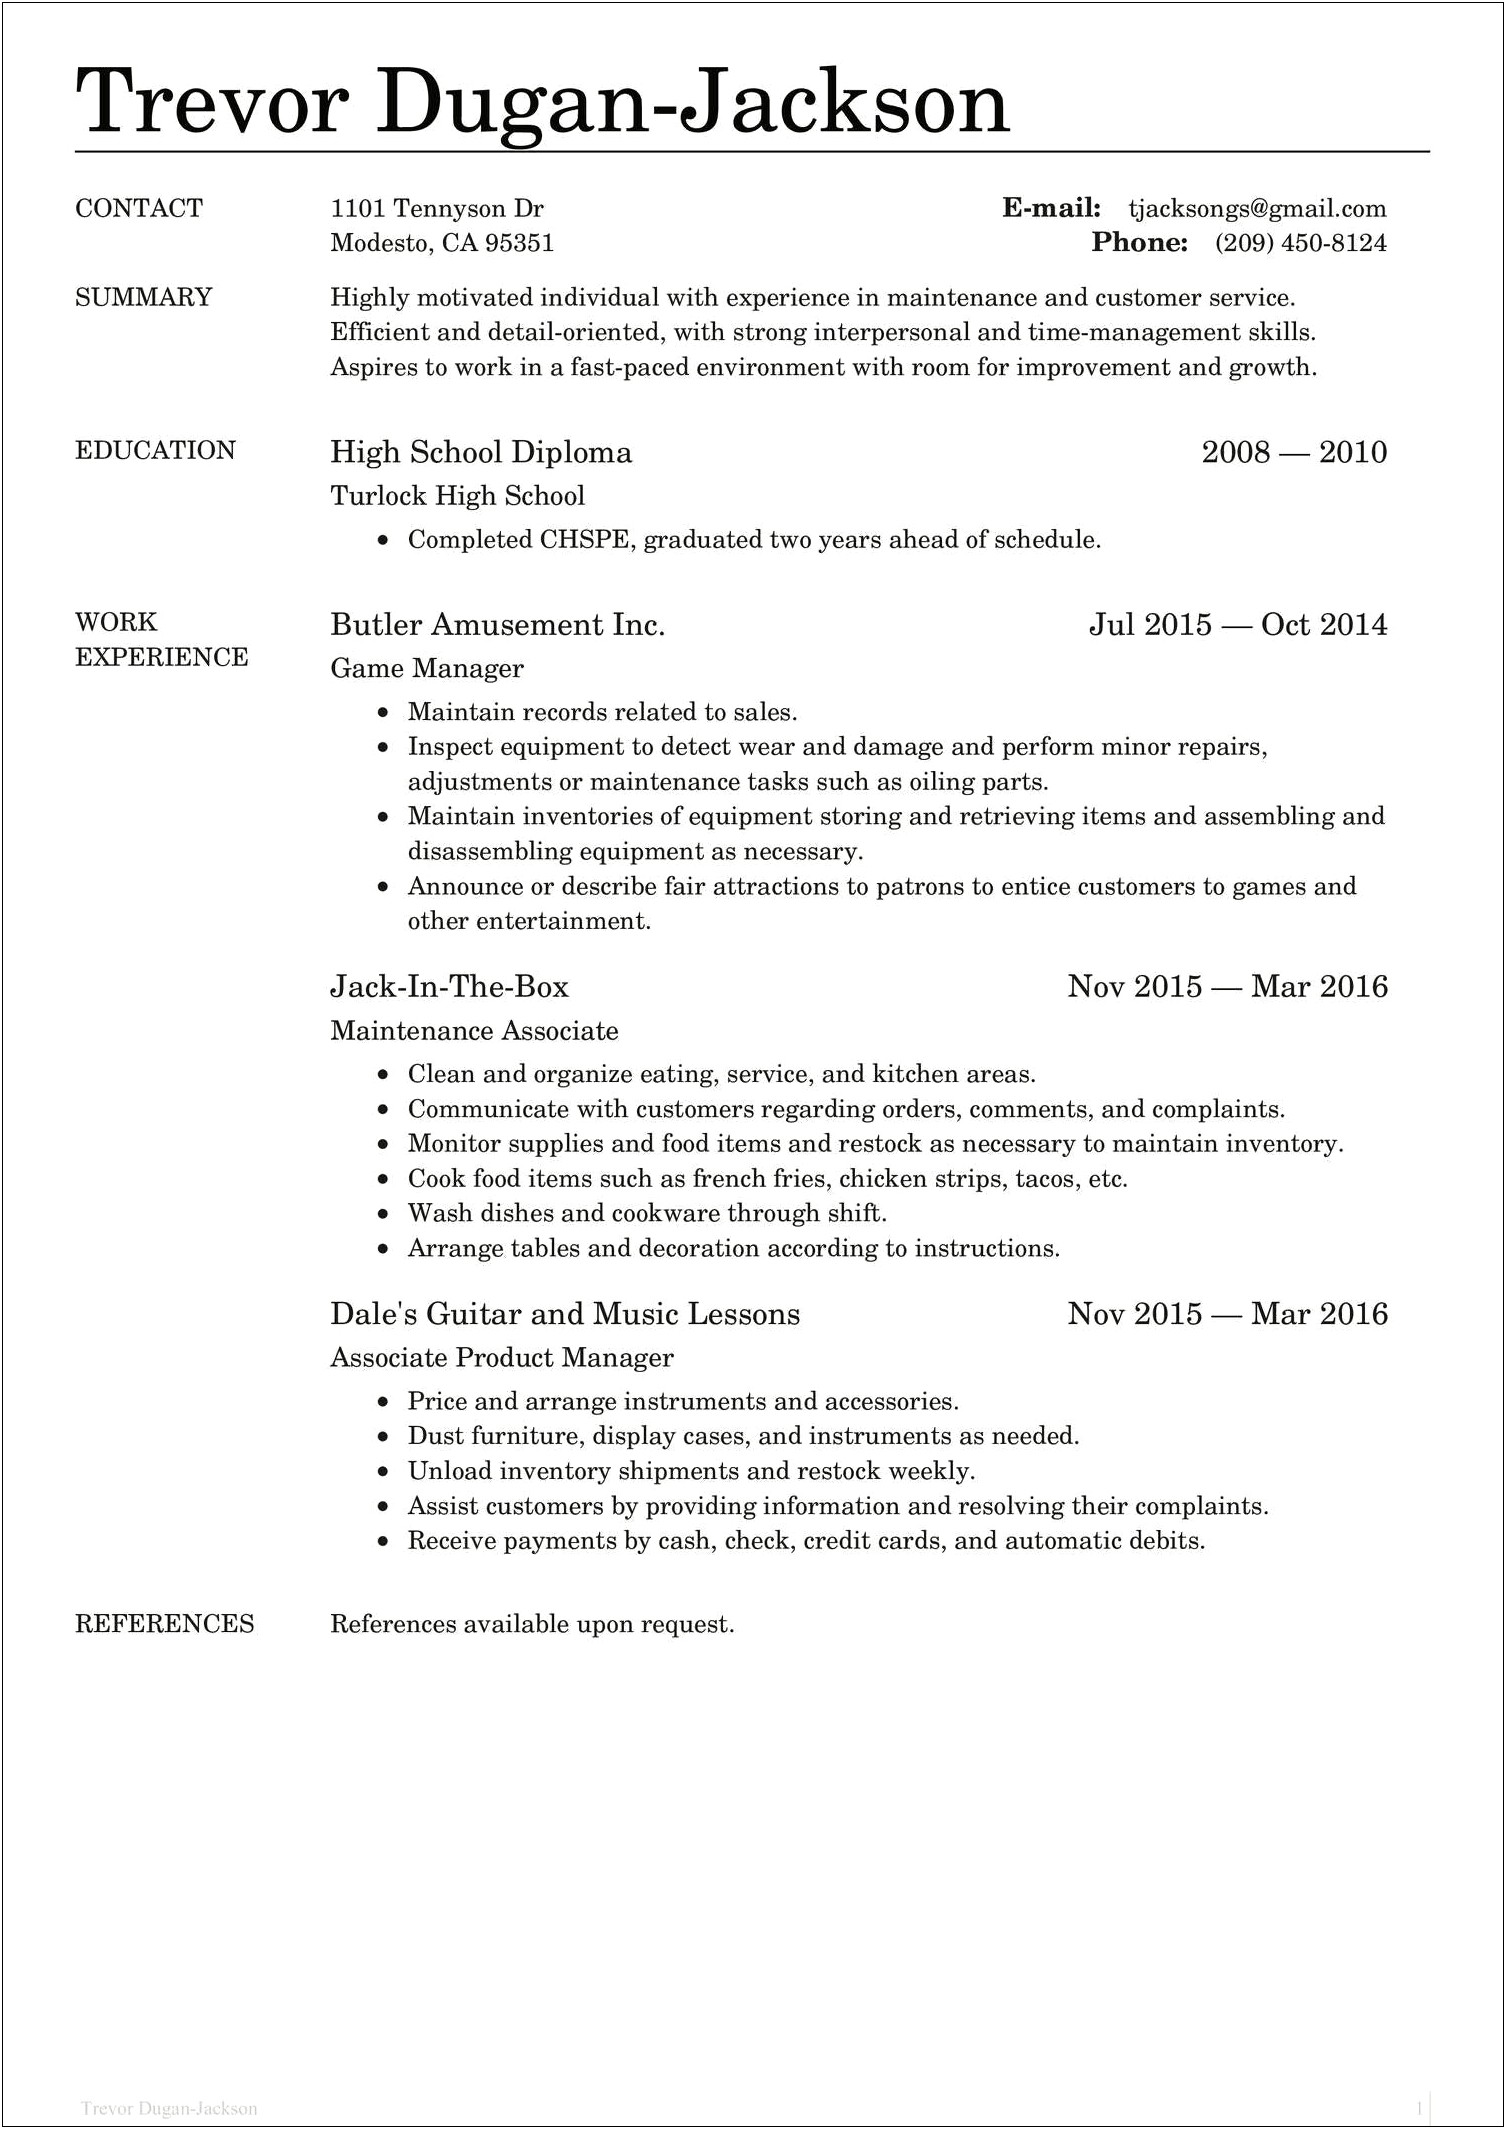 Resume For Someone Who Working In Fast Food